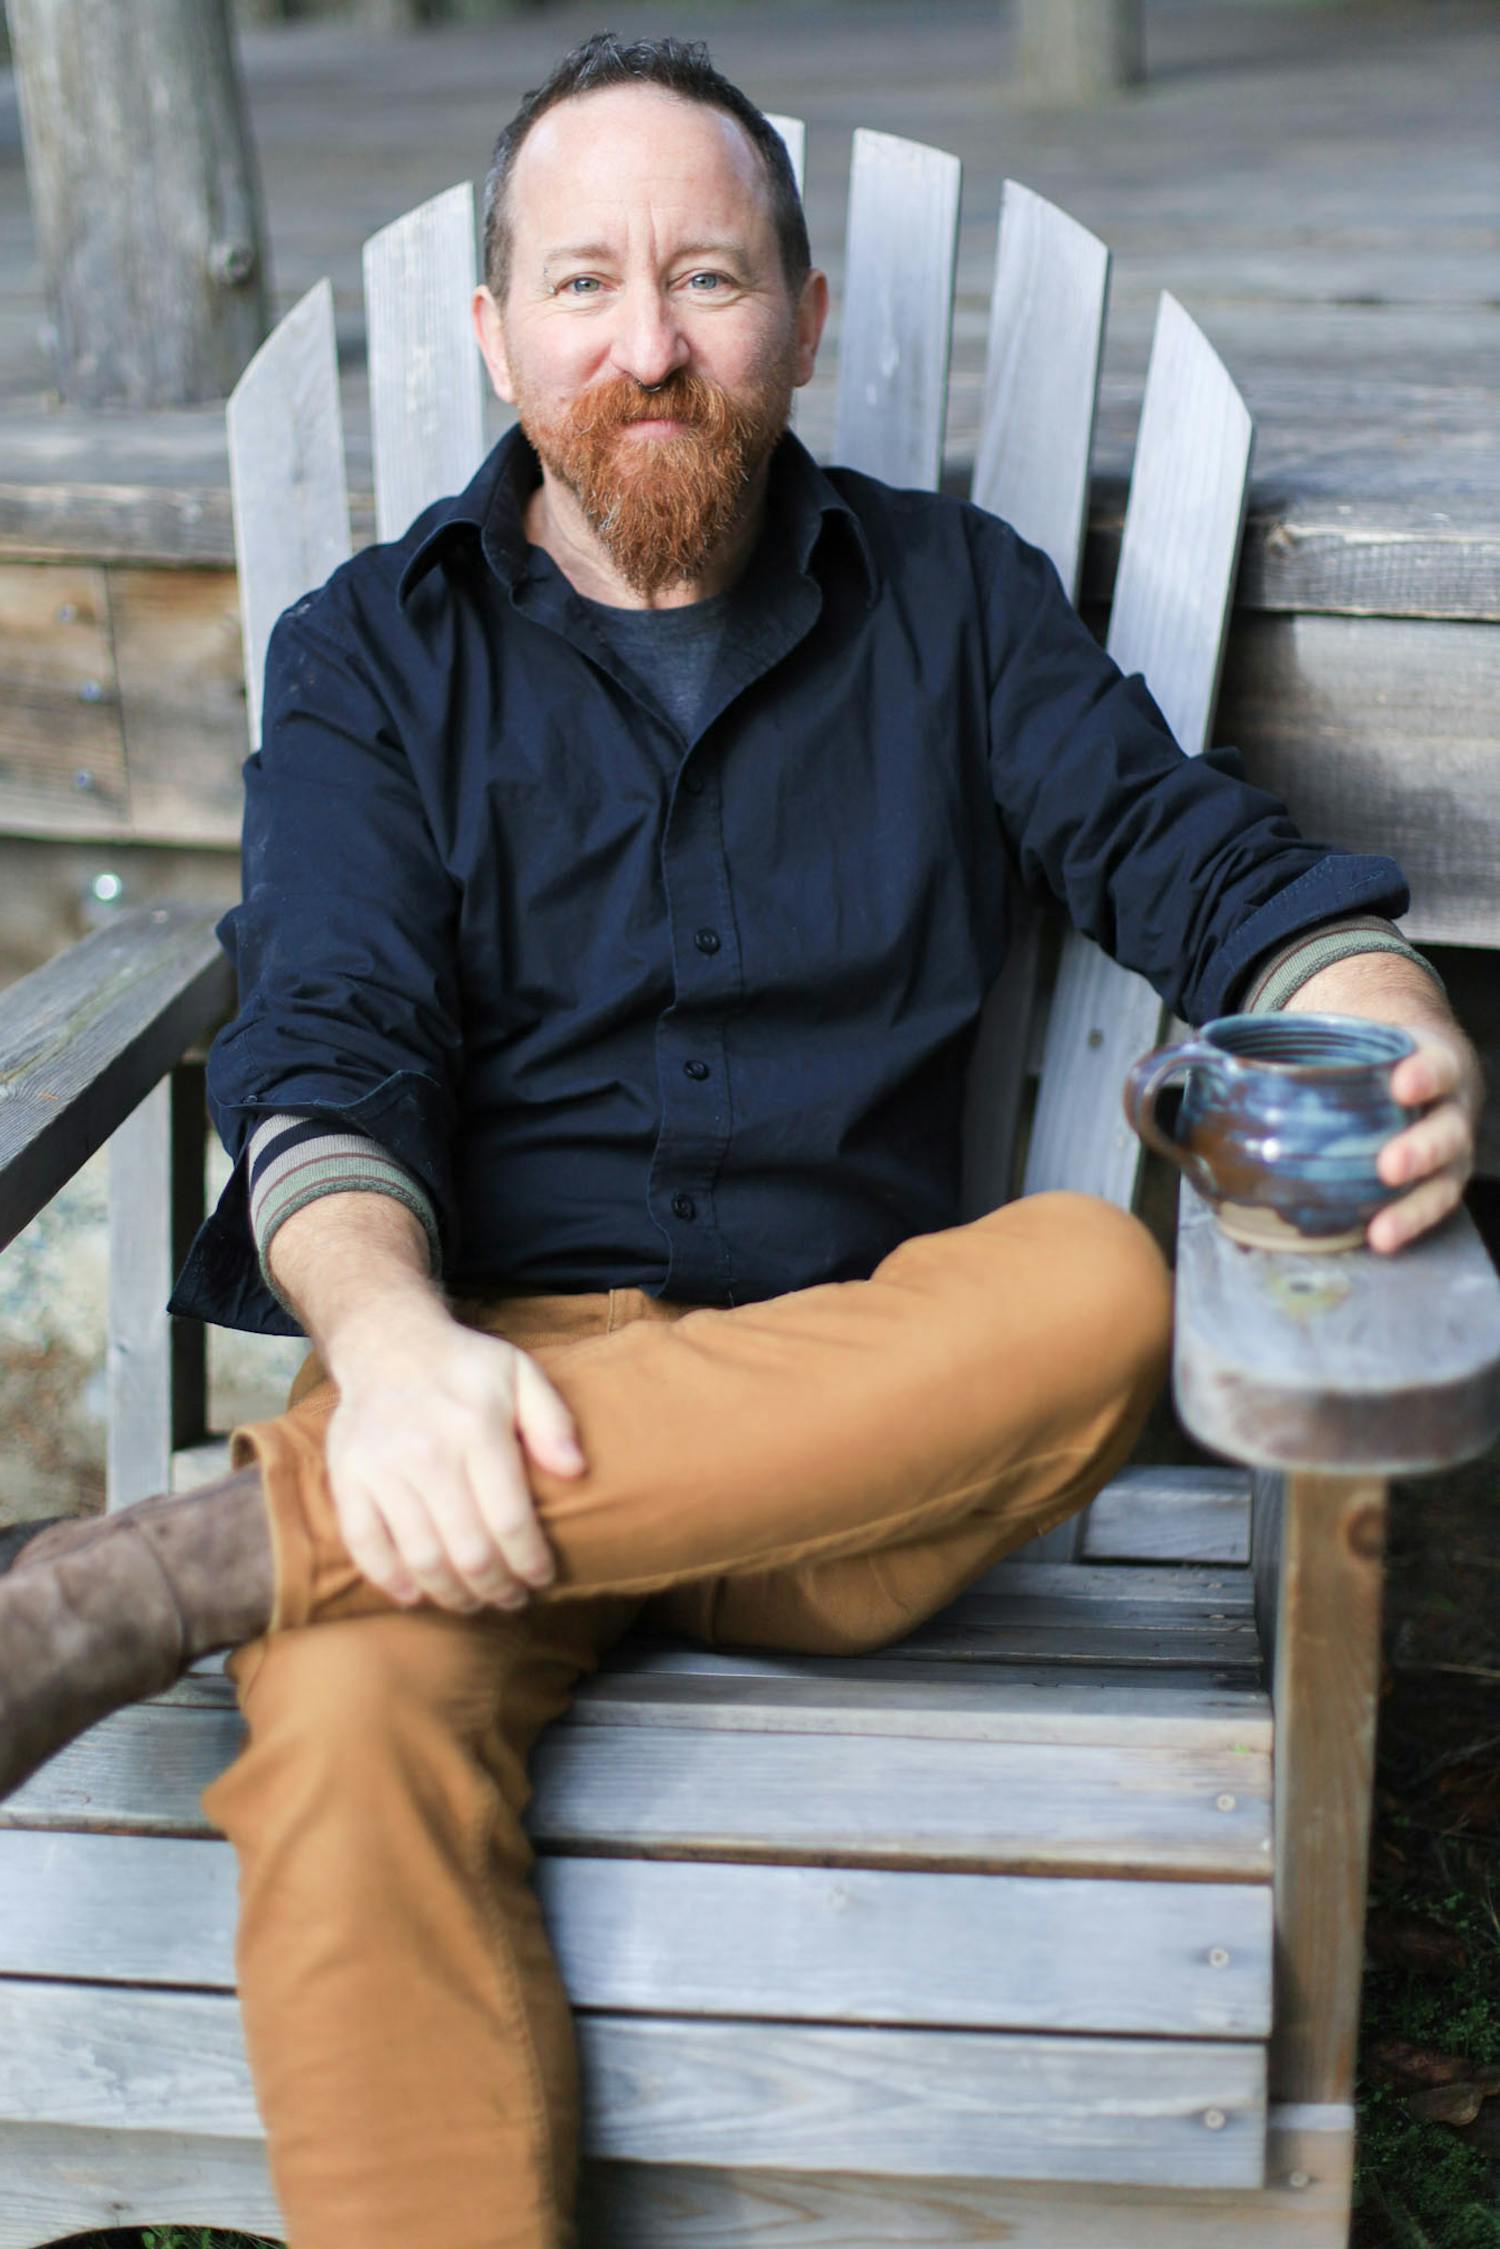 A photo of dean sitting cross legged in a chair outdoors, holding a tea mug with a welcoming expression